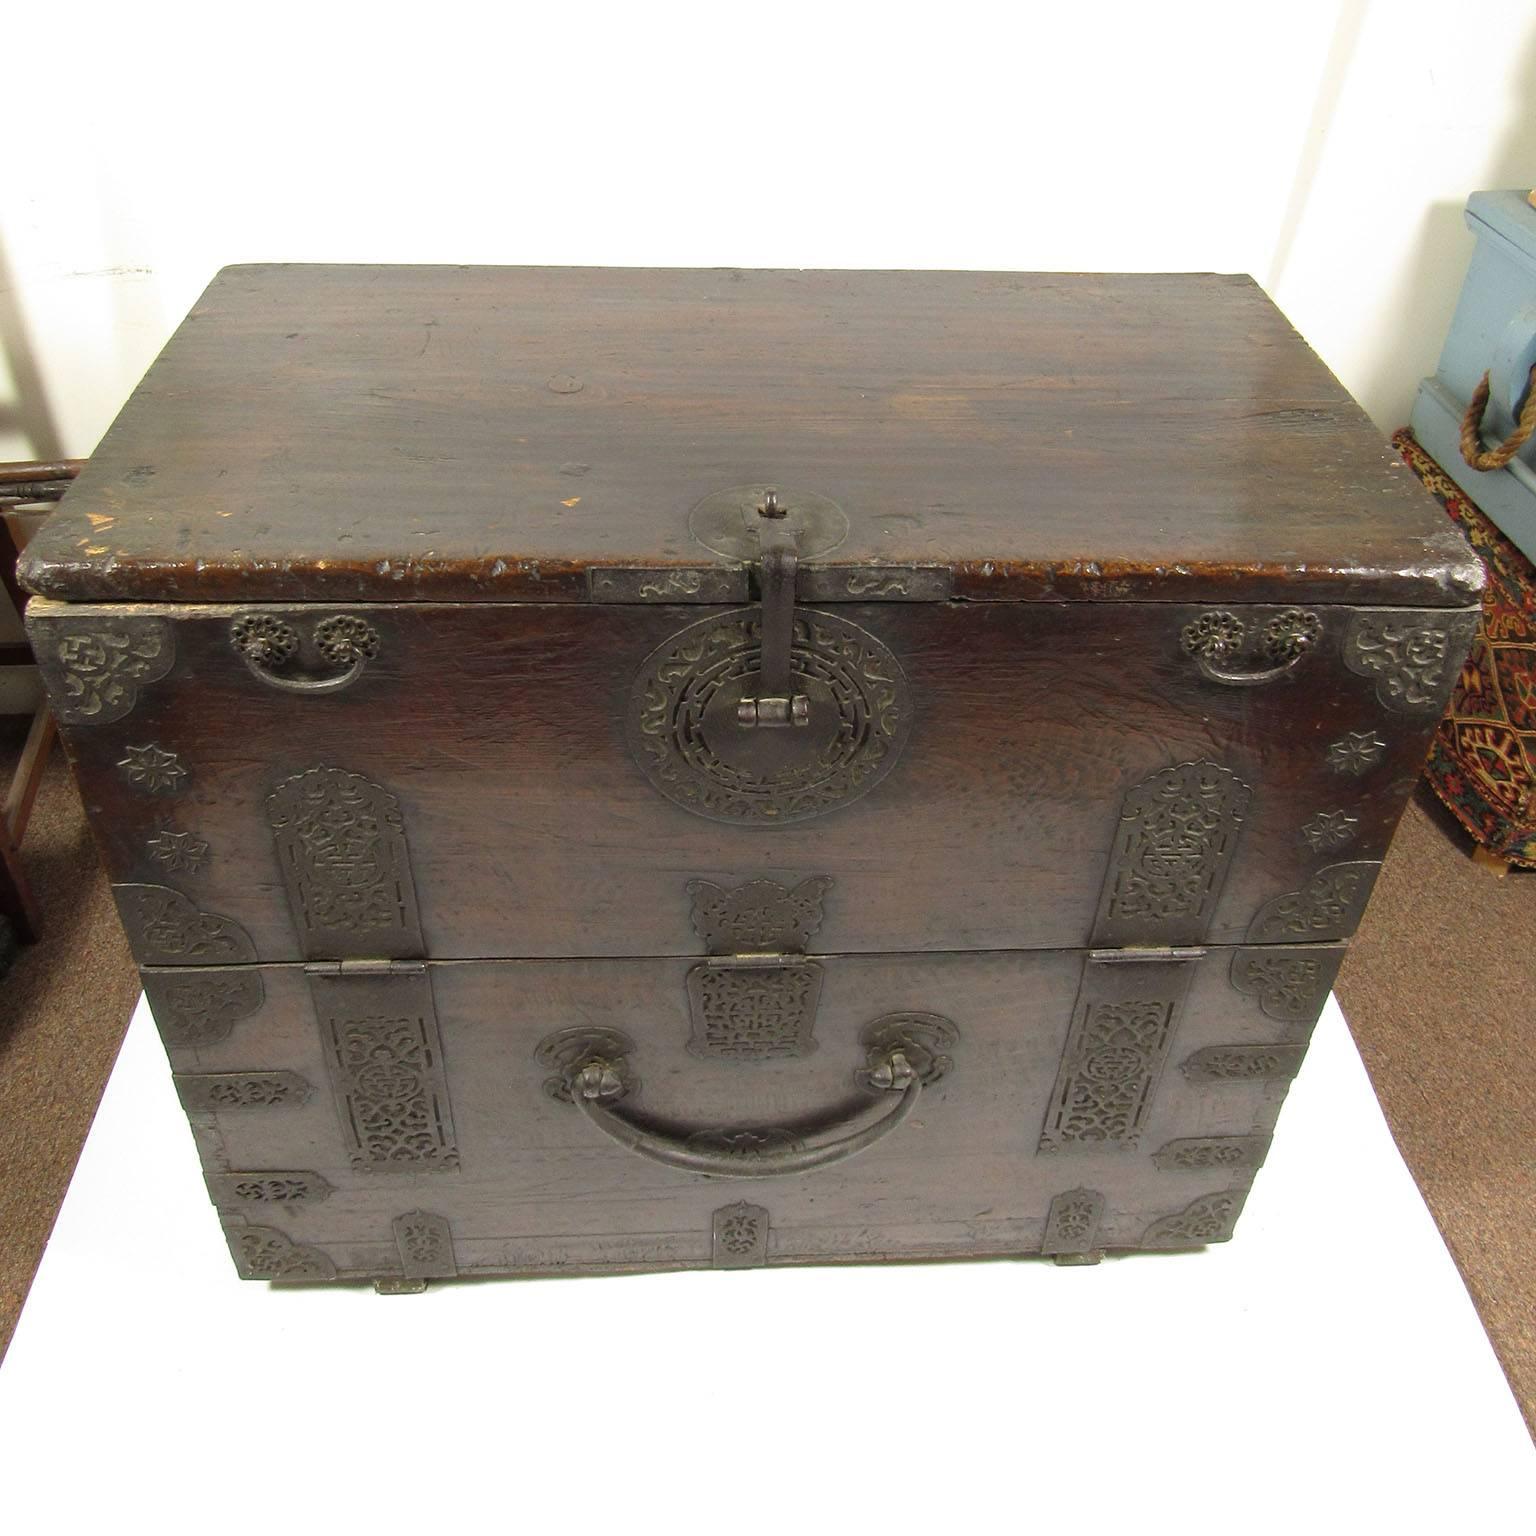 19th century Korean Hardwood Bandaji storage or blanket chest, with original iron mounts, drop front revealing a single shelf lined with calligraphic paper on both sides. Dimensions: 33 x 36 1/2 x 19 1/2 inches.